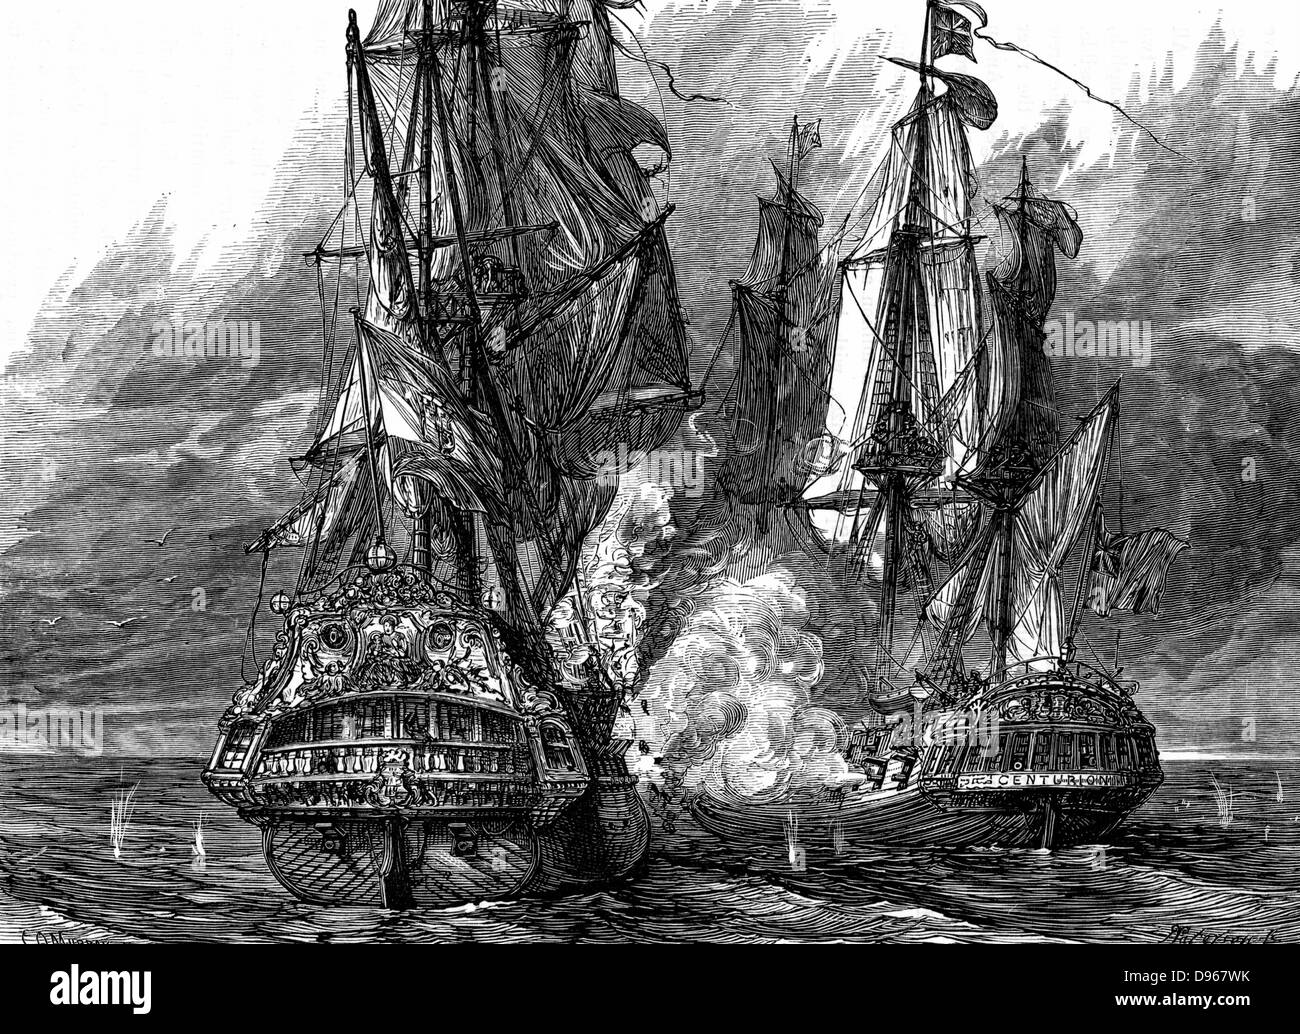 George Anson, Baron Anson (1697-1762) English naval commander, in the 'Centurion' (right) taking the Spanish galleon 'Nostra Signora de Cabadonga' off the Philippines. War of Jenkins' Ear 1739-48. Woodcut c.1895 Stock Photo